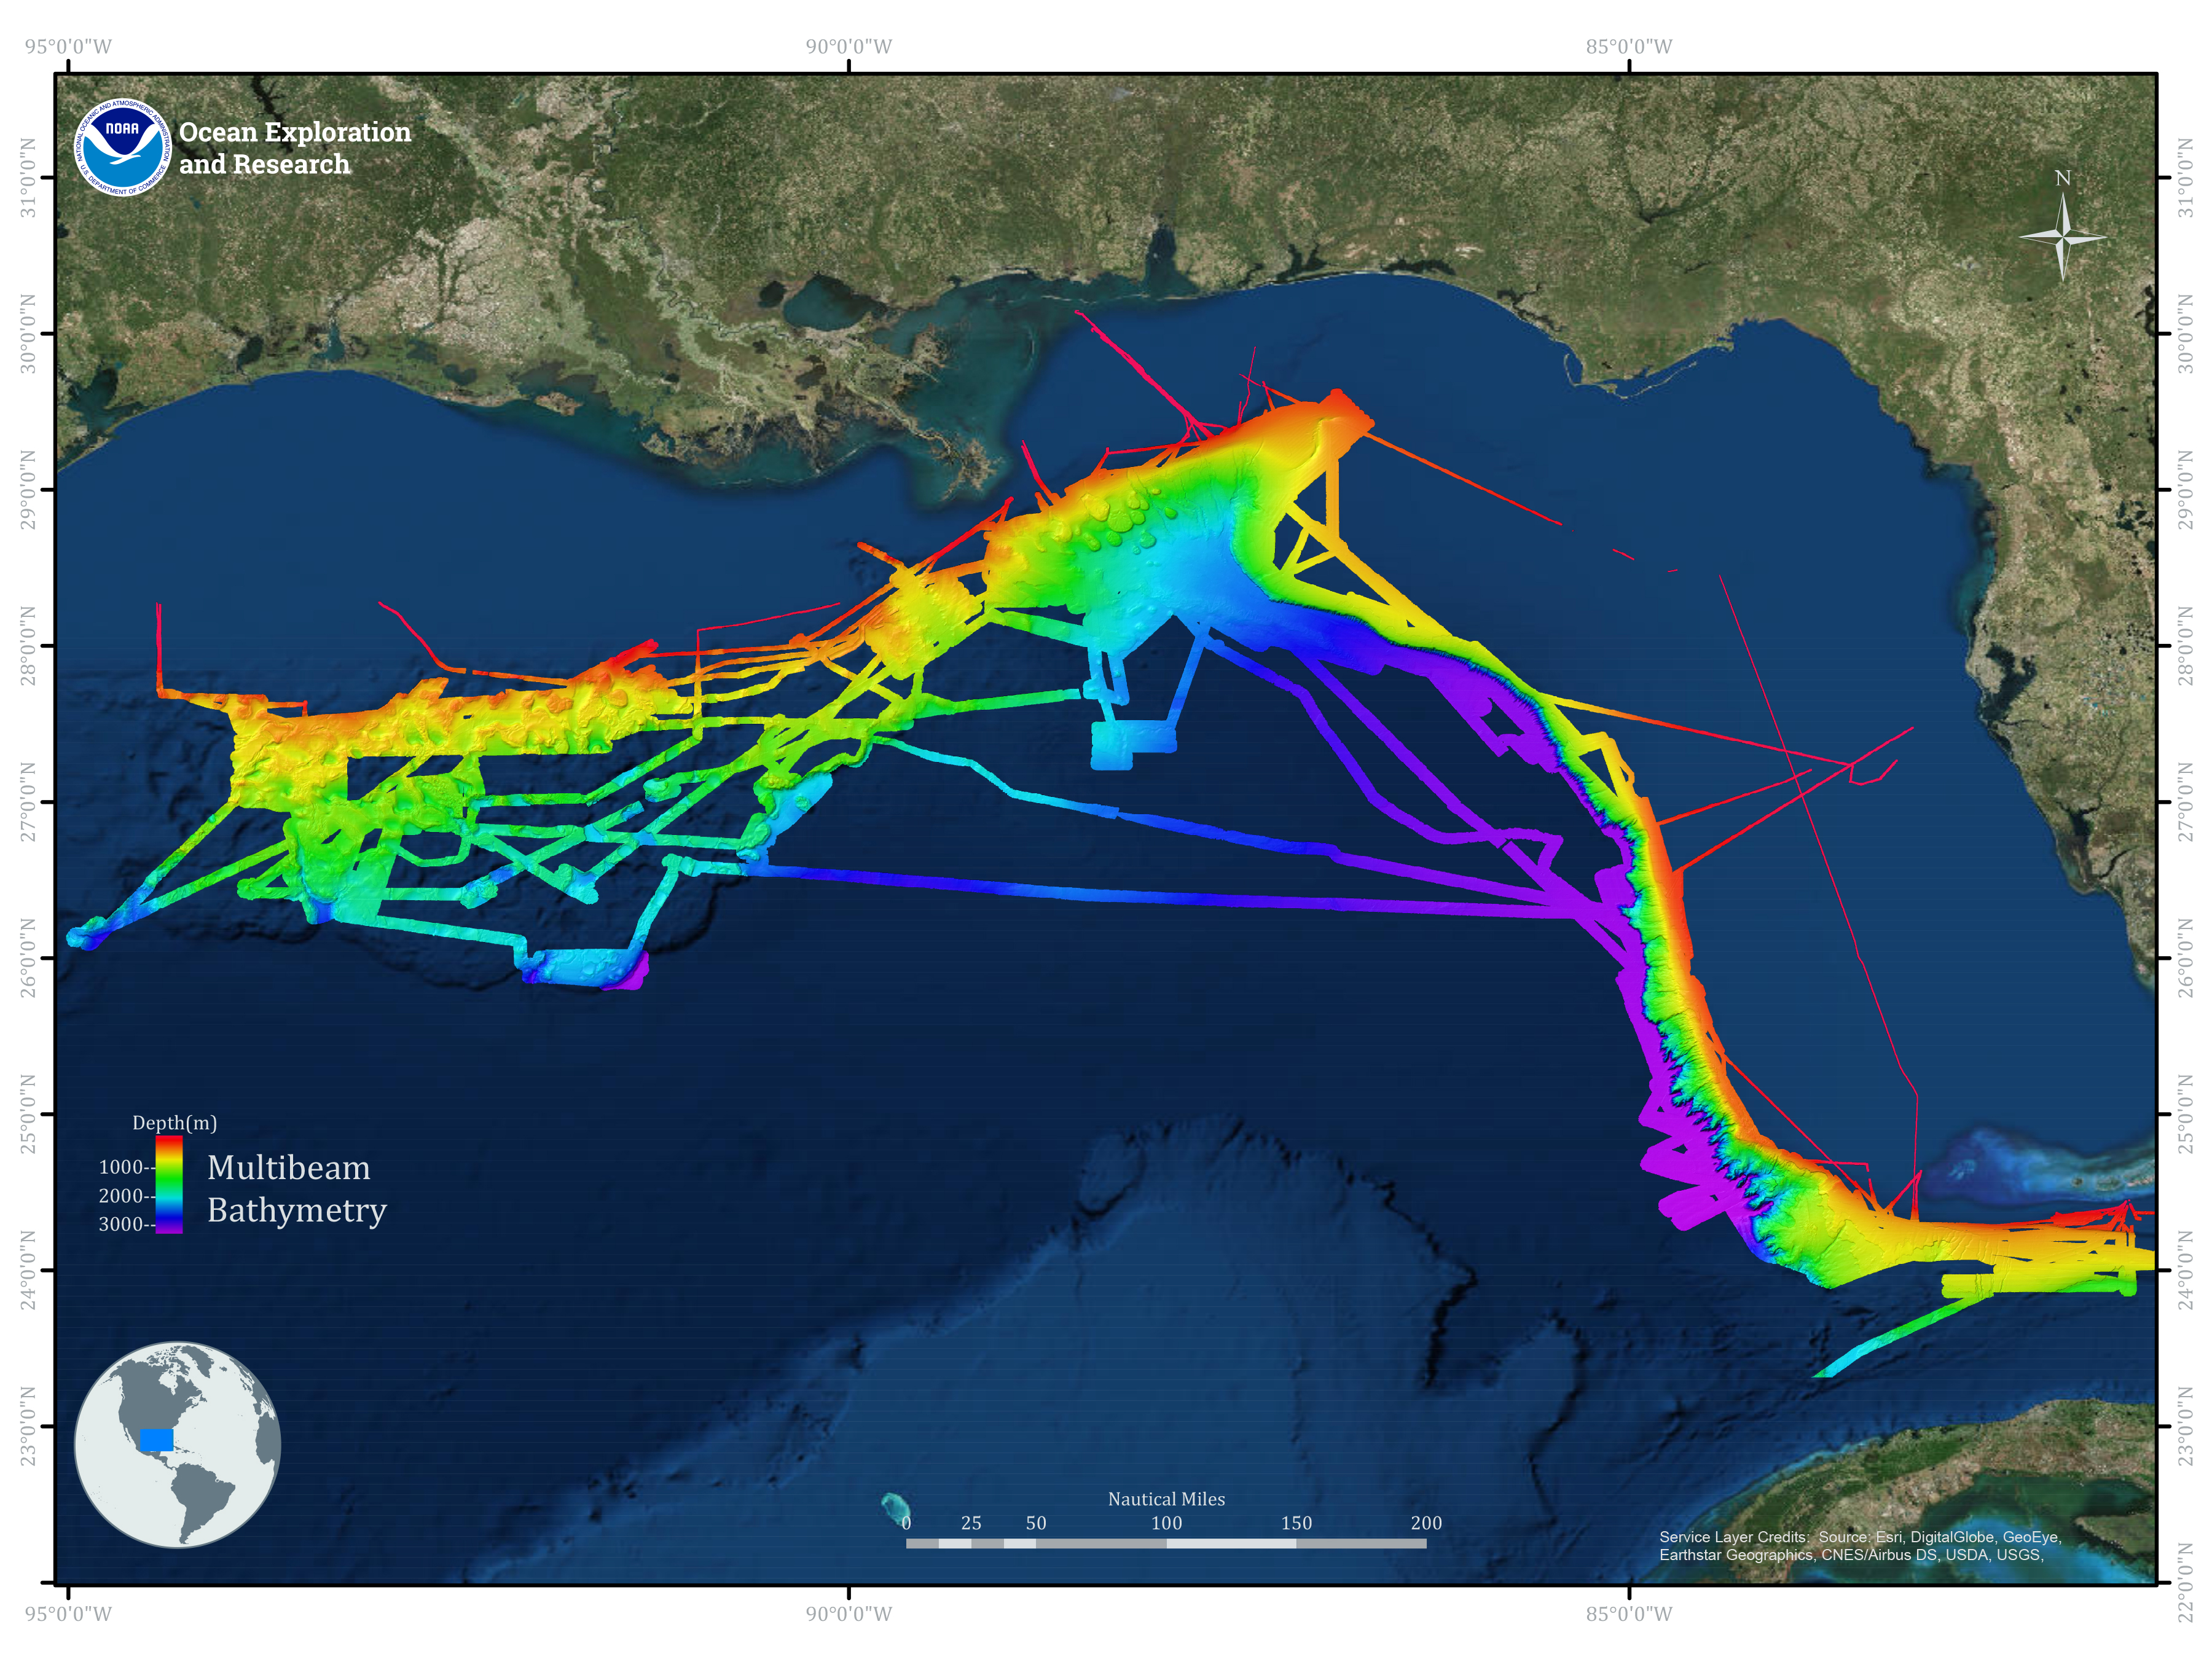 Figure 1. Map of the Gulf of Mexico showing cumulative color-coded multibeam sonar bathymetry collected during all NOAA Ship Okeanos Explorer expeditions, including the three most recent expeditions. Map courtesy of NOAA’s Office of Ocean Exploration and Research. Download larger version (jpg, 13.7 MB).